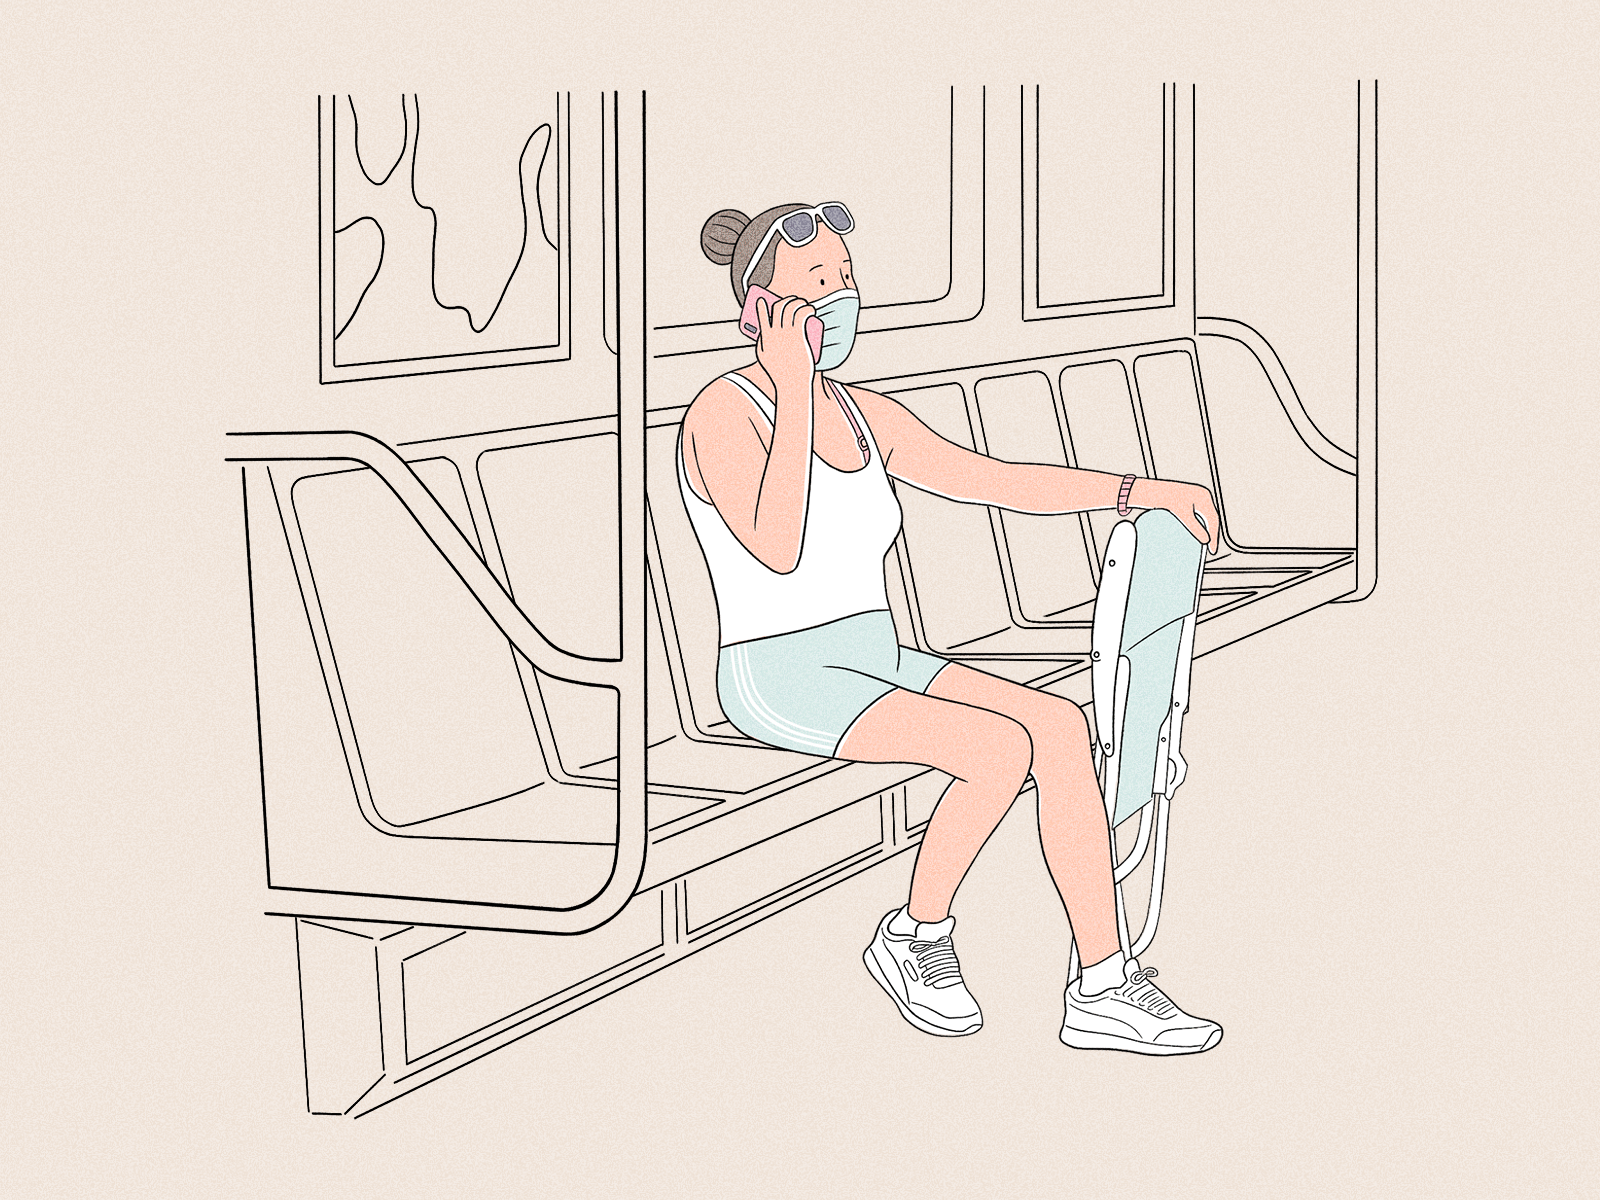 A subway ride in the New York City summer. ☀️🗽 calling character drawing hot illustration men mta newyork nyc people procreate ride sleeping subway summer texting women